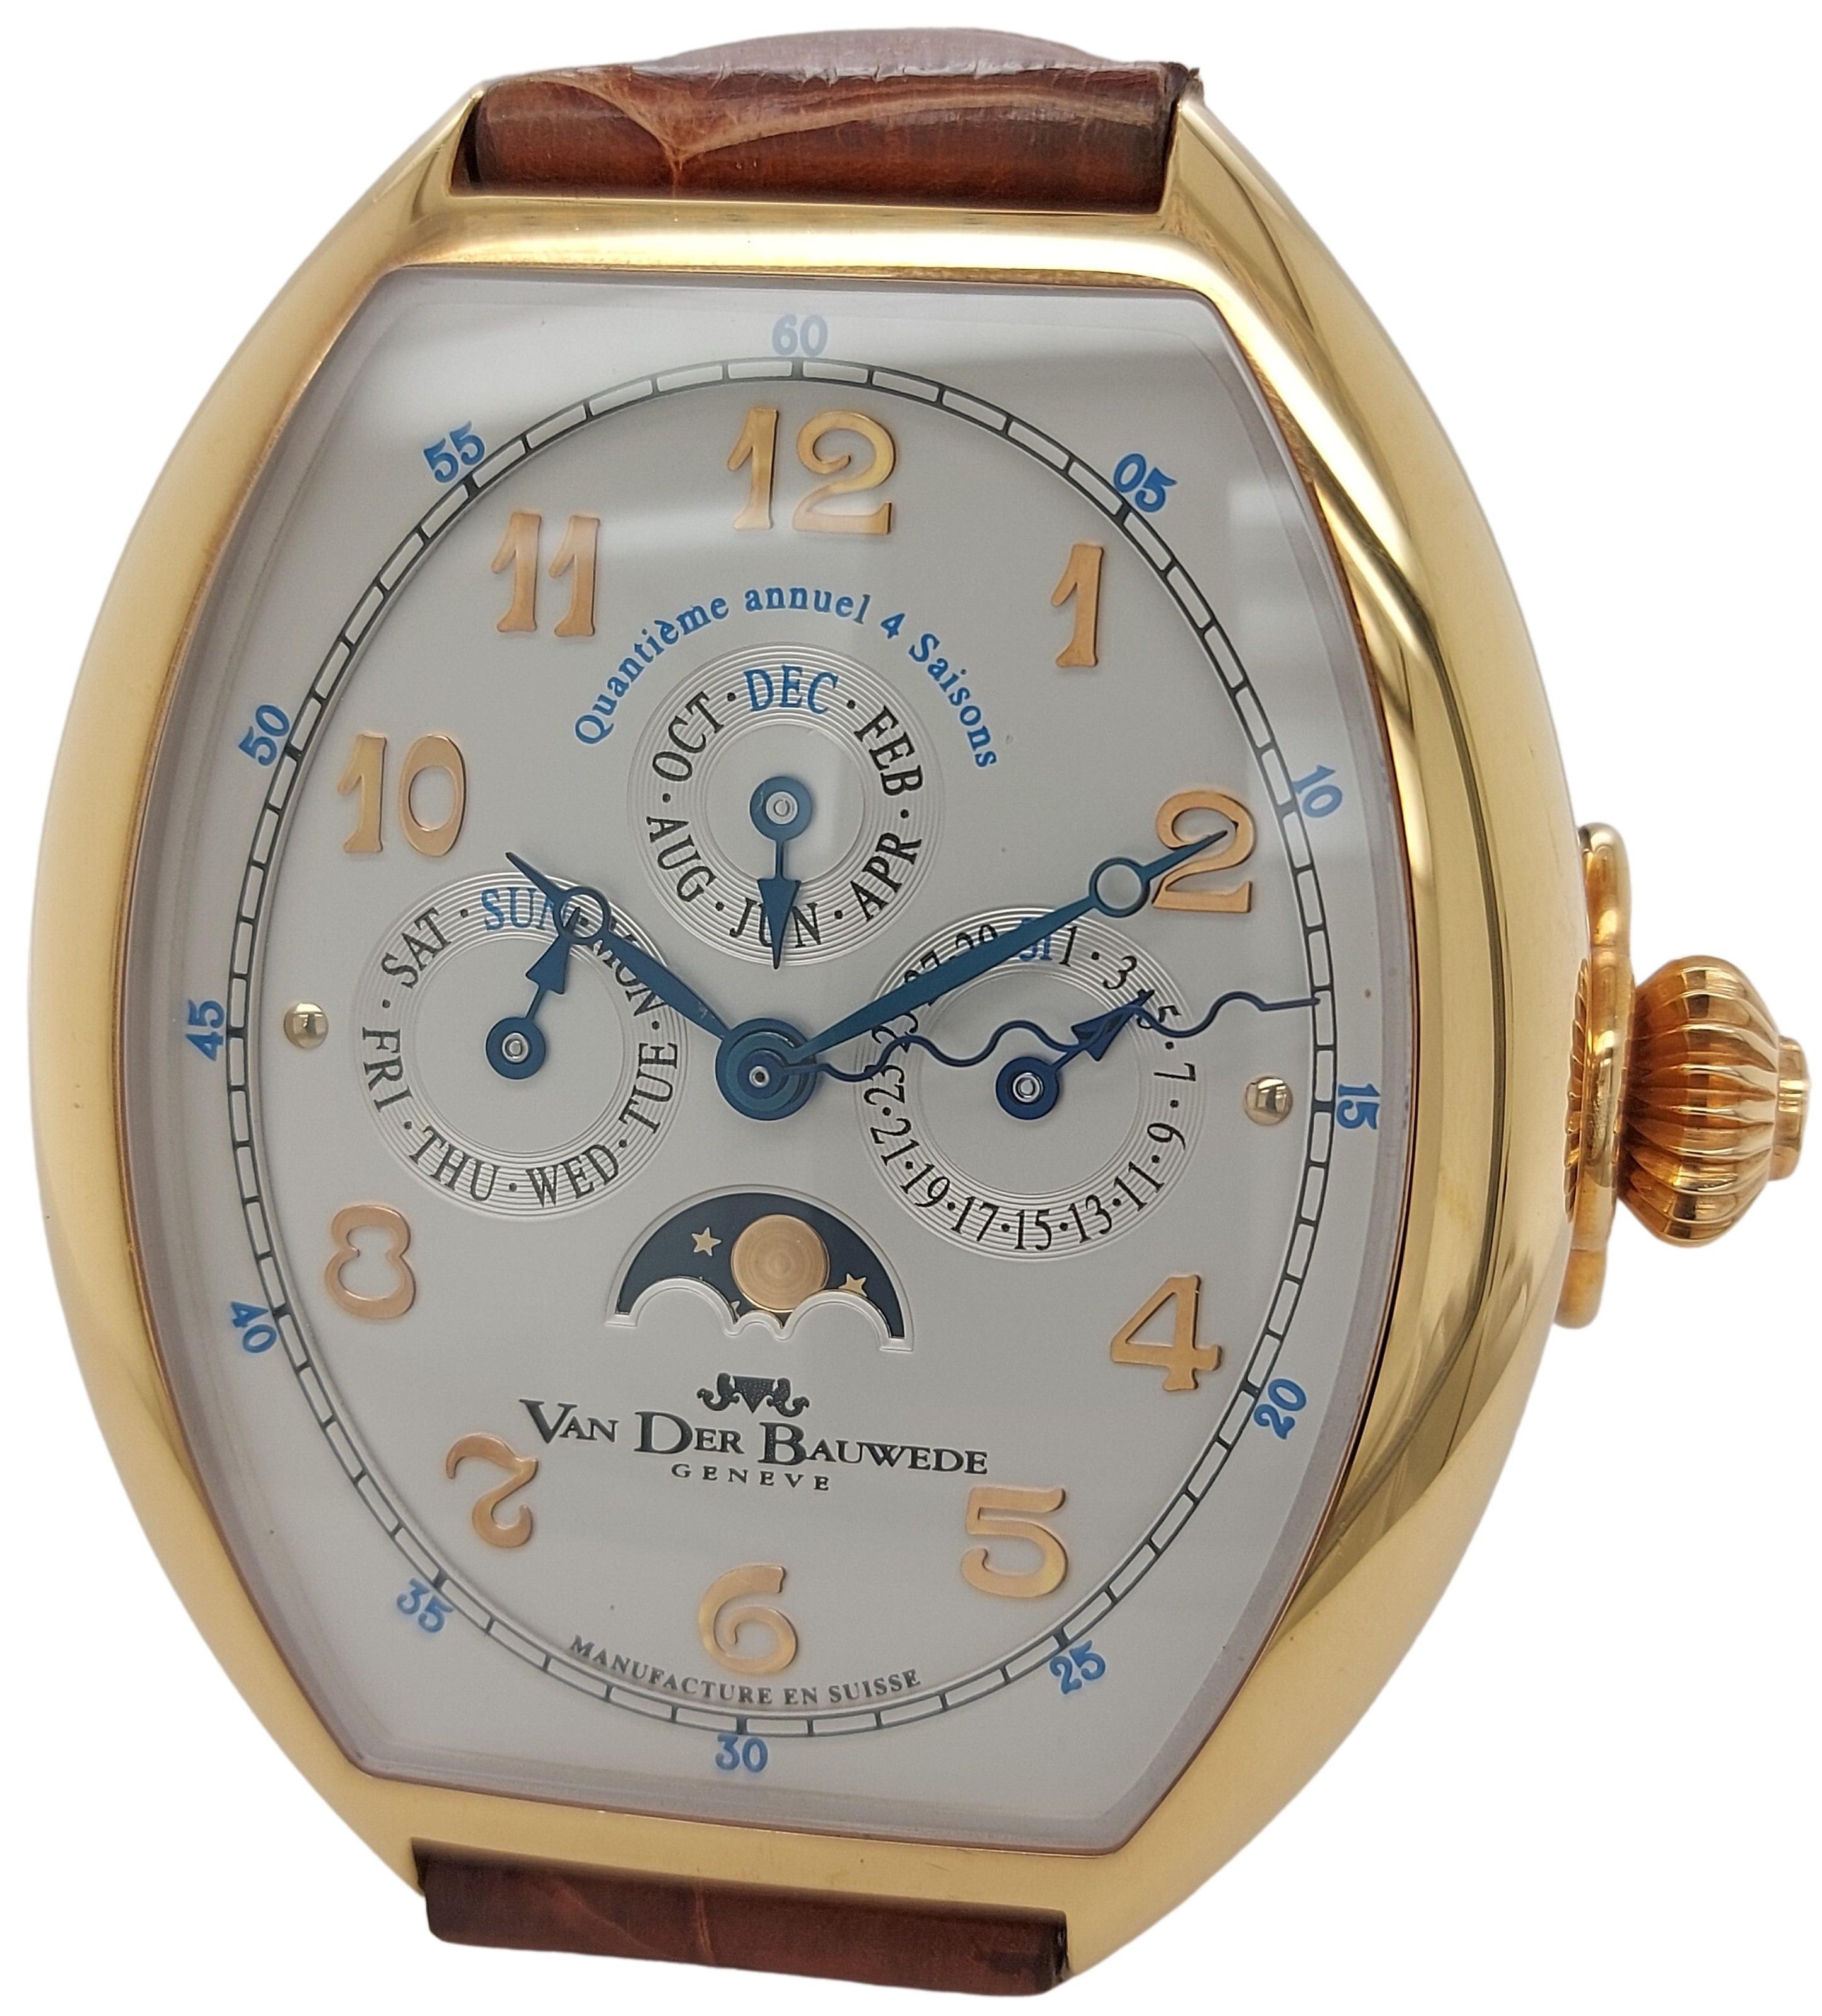 Golden Van Der Bauwede Quantième annuel 4 saisons - Limited Edition

Movement: Automatic

Functions: Hours, Minutes, Sweep Seconds, Day, Month, Moonphase

Case: 18kt pink gold, diameter 42.5 mm x 44 mm, thickness 19 mm, sapphire crystal, back case